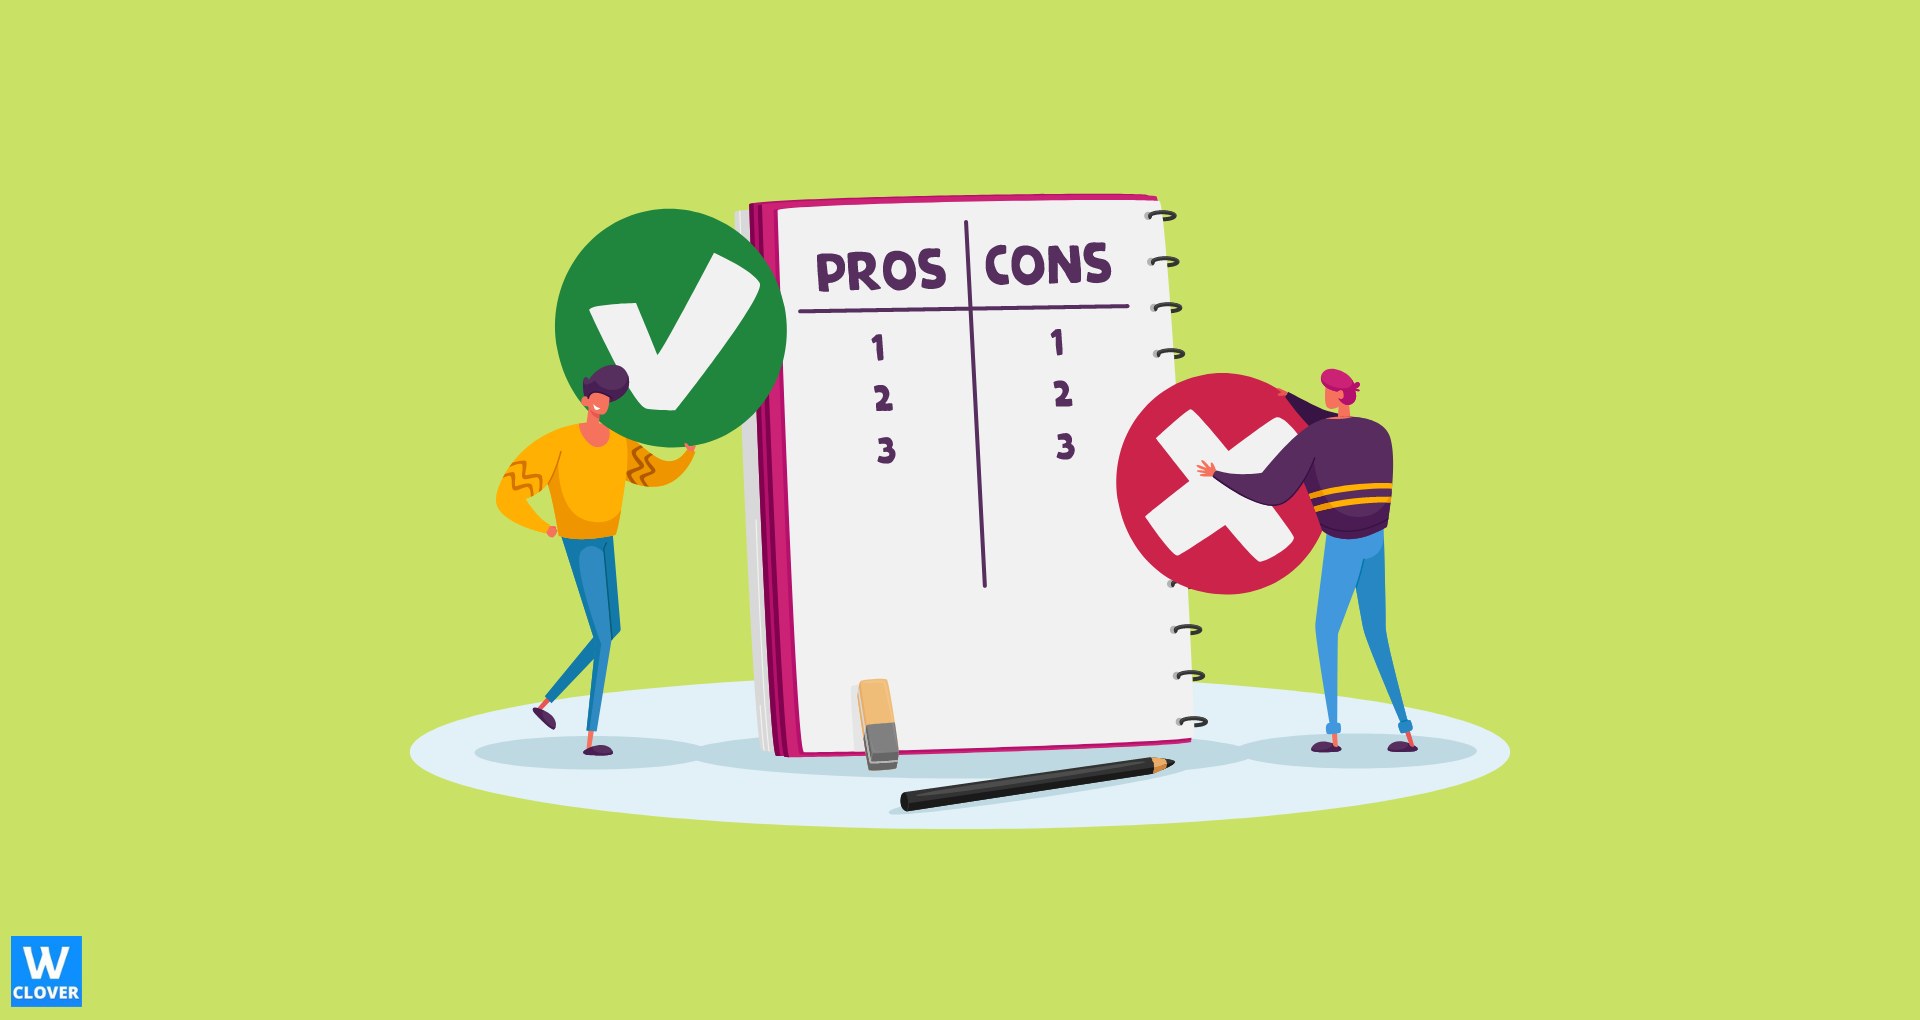 Pros and Cons man and women graphics on a green background